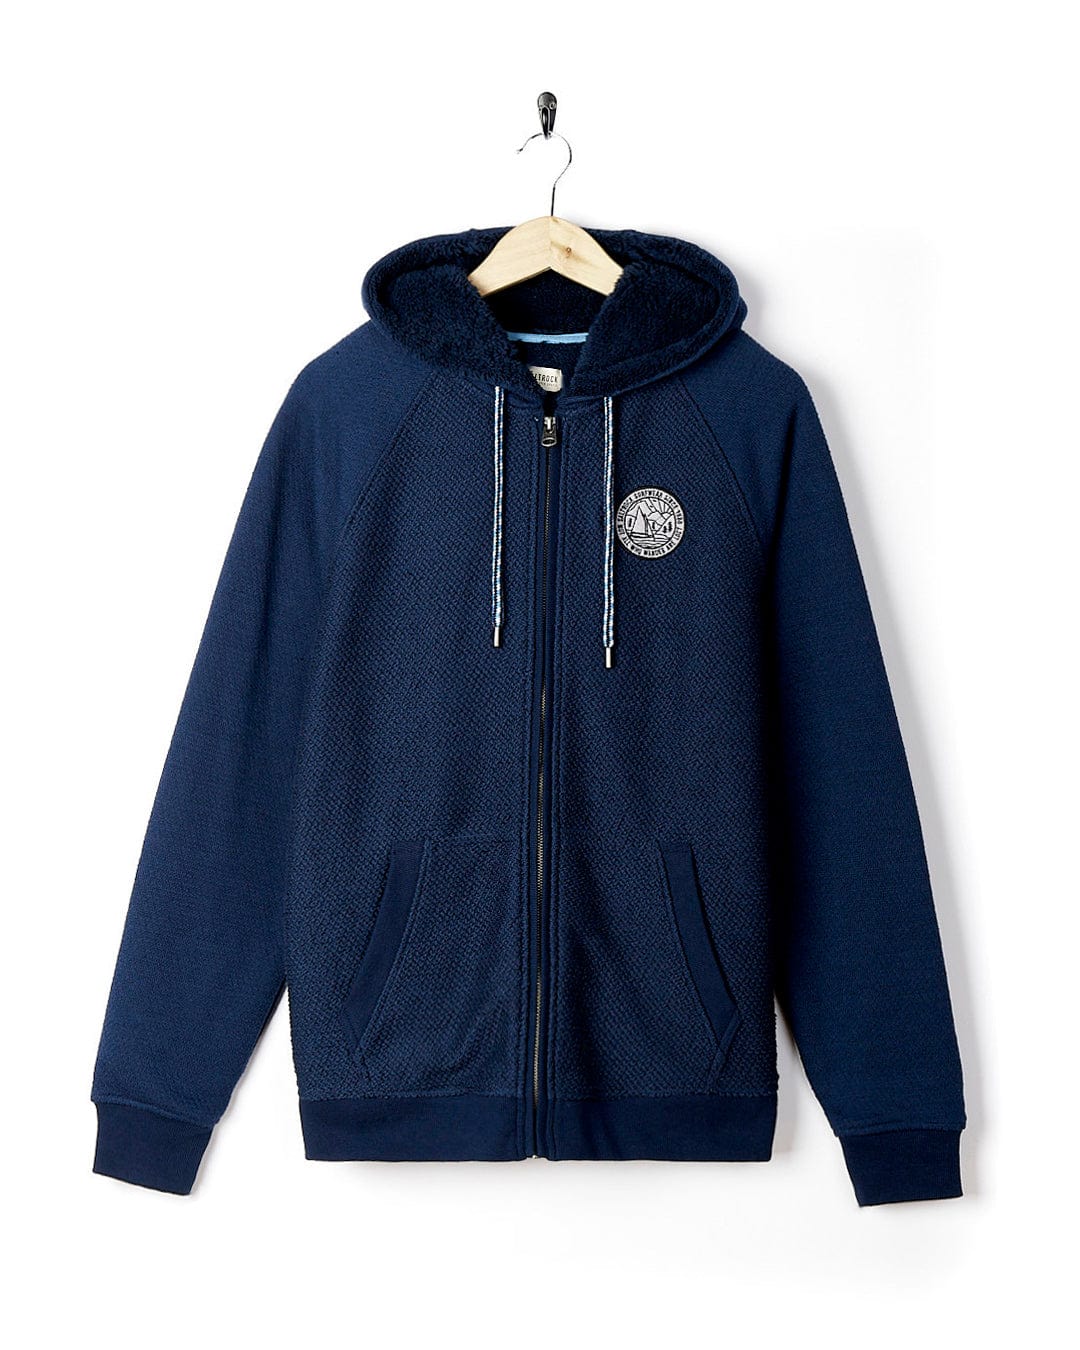 A Saltrock - Mens Orkney Borg Lined Hoodie - Dark Blue with a white logo on it.